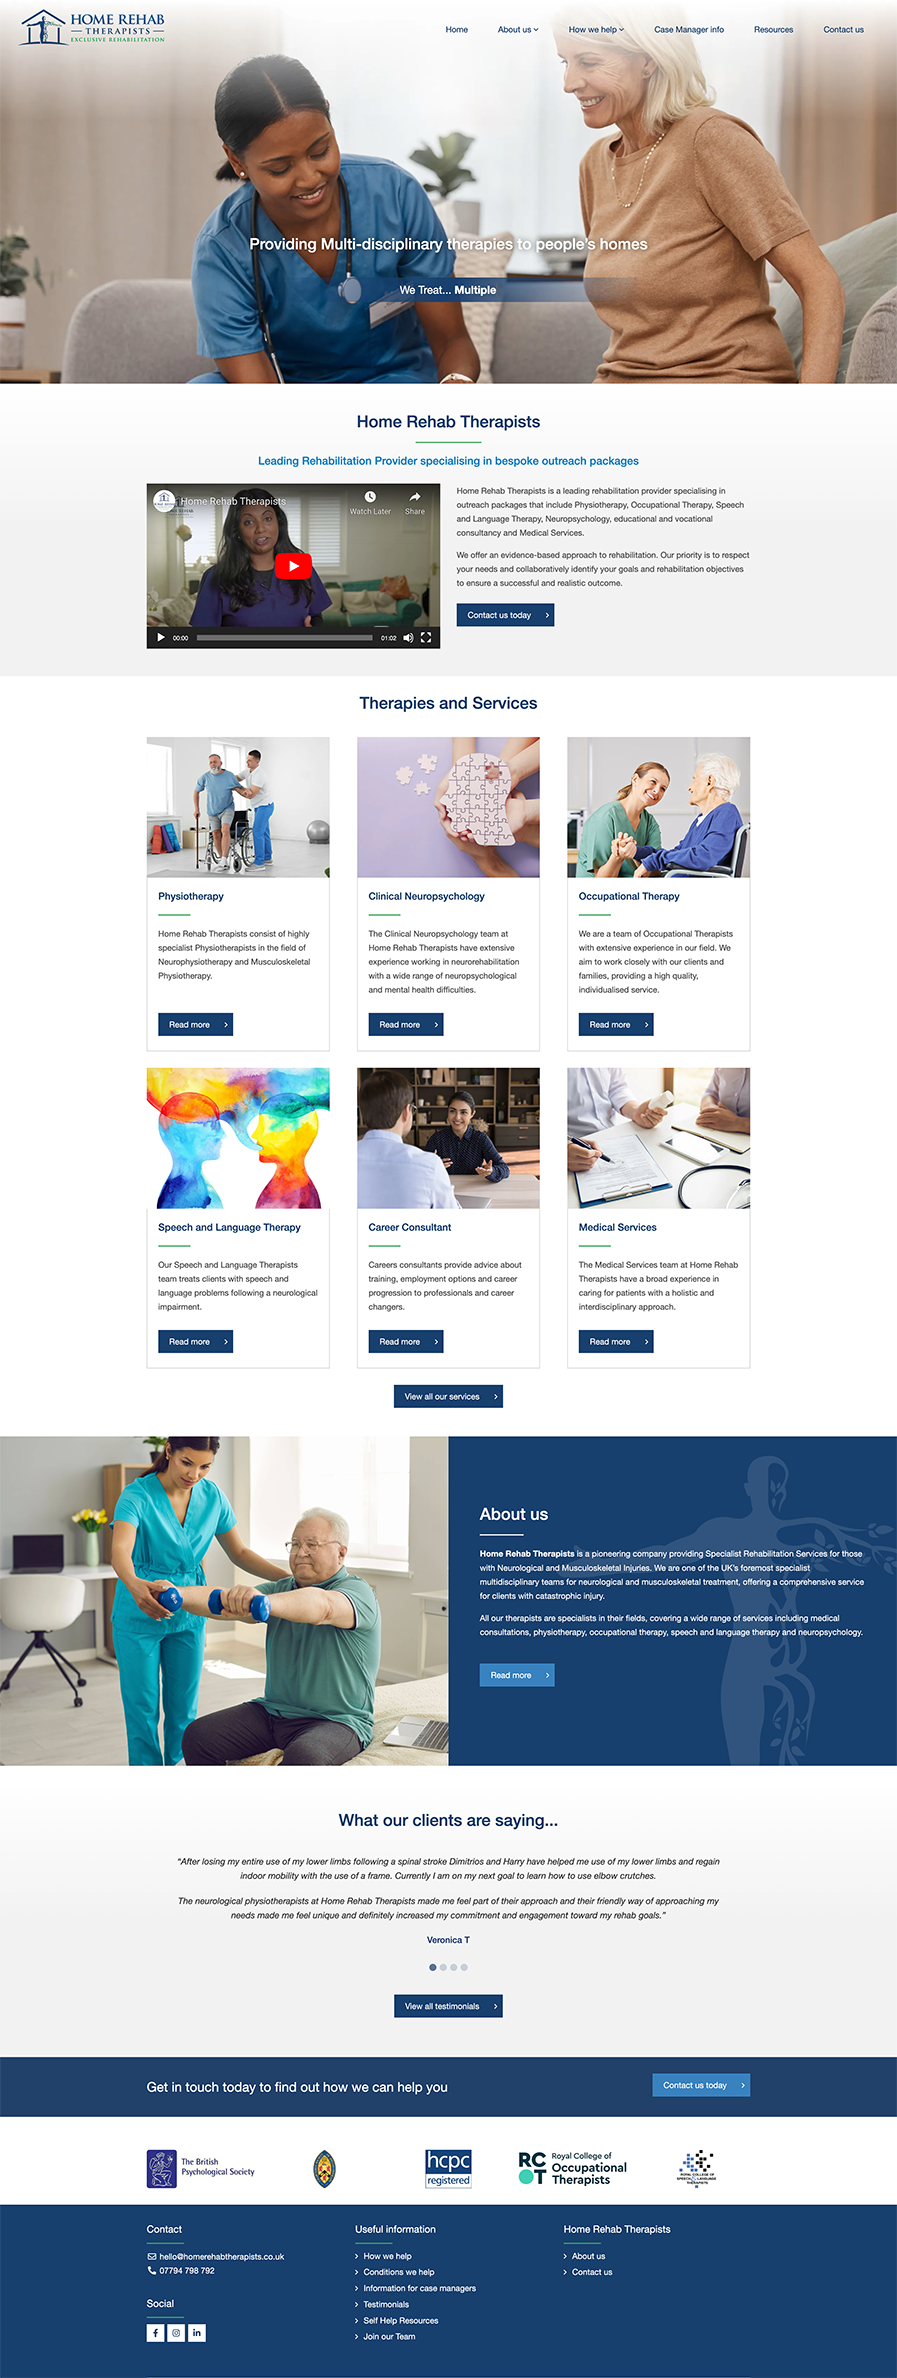 Home Rehab Therapists Home Page